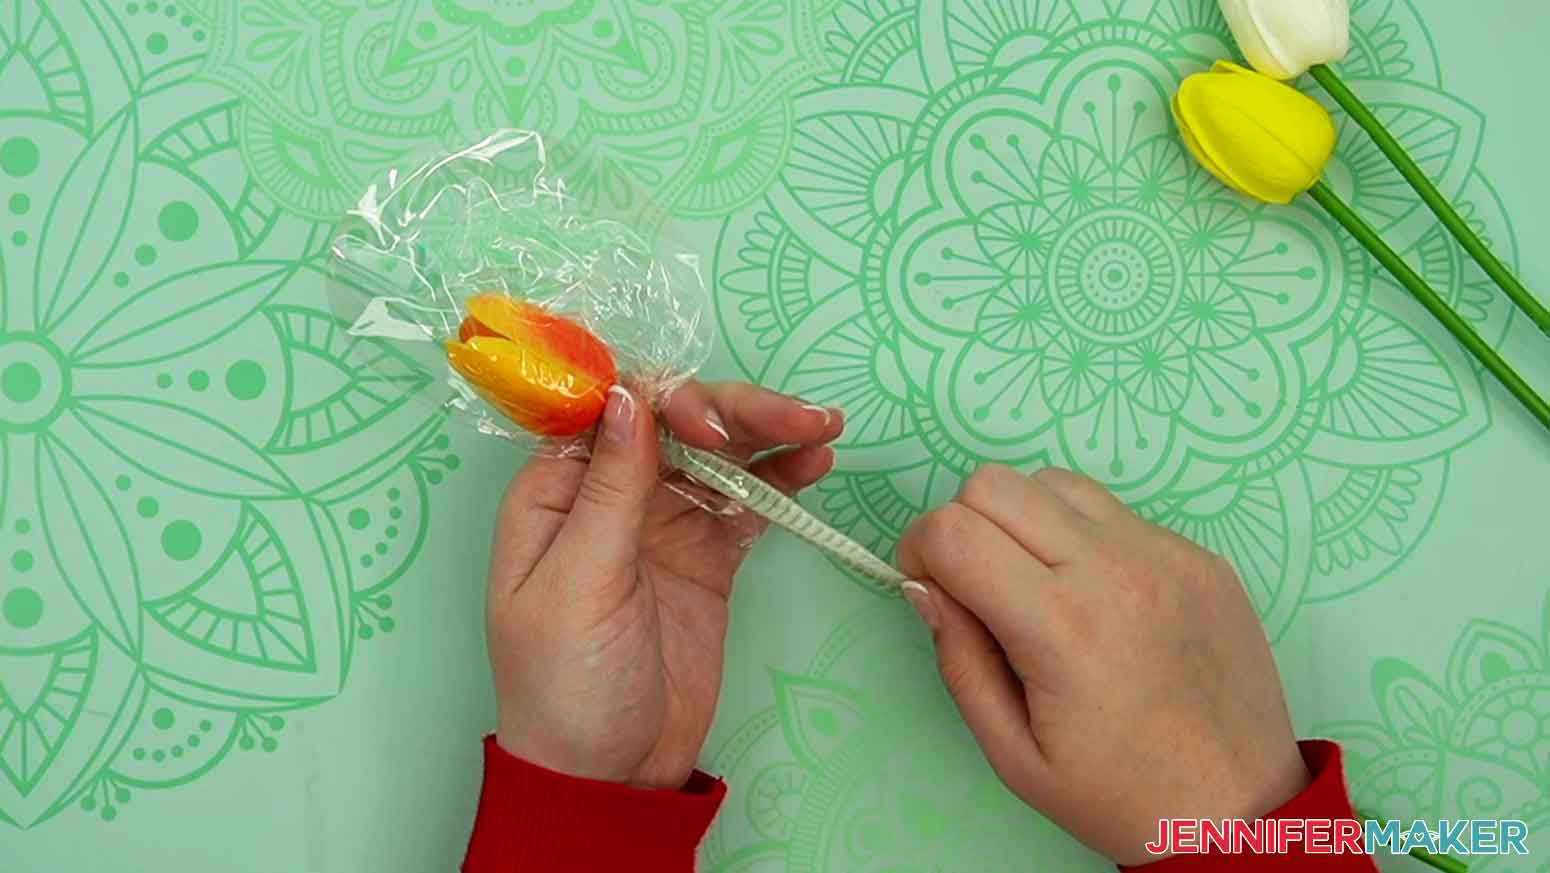 When the tulip is inside the balloon, the mesh wrap can be pulled down the stem and removed from the tulip.